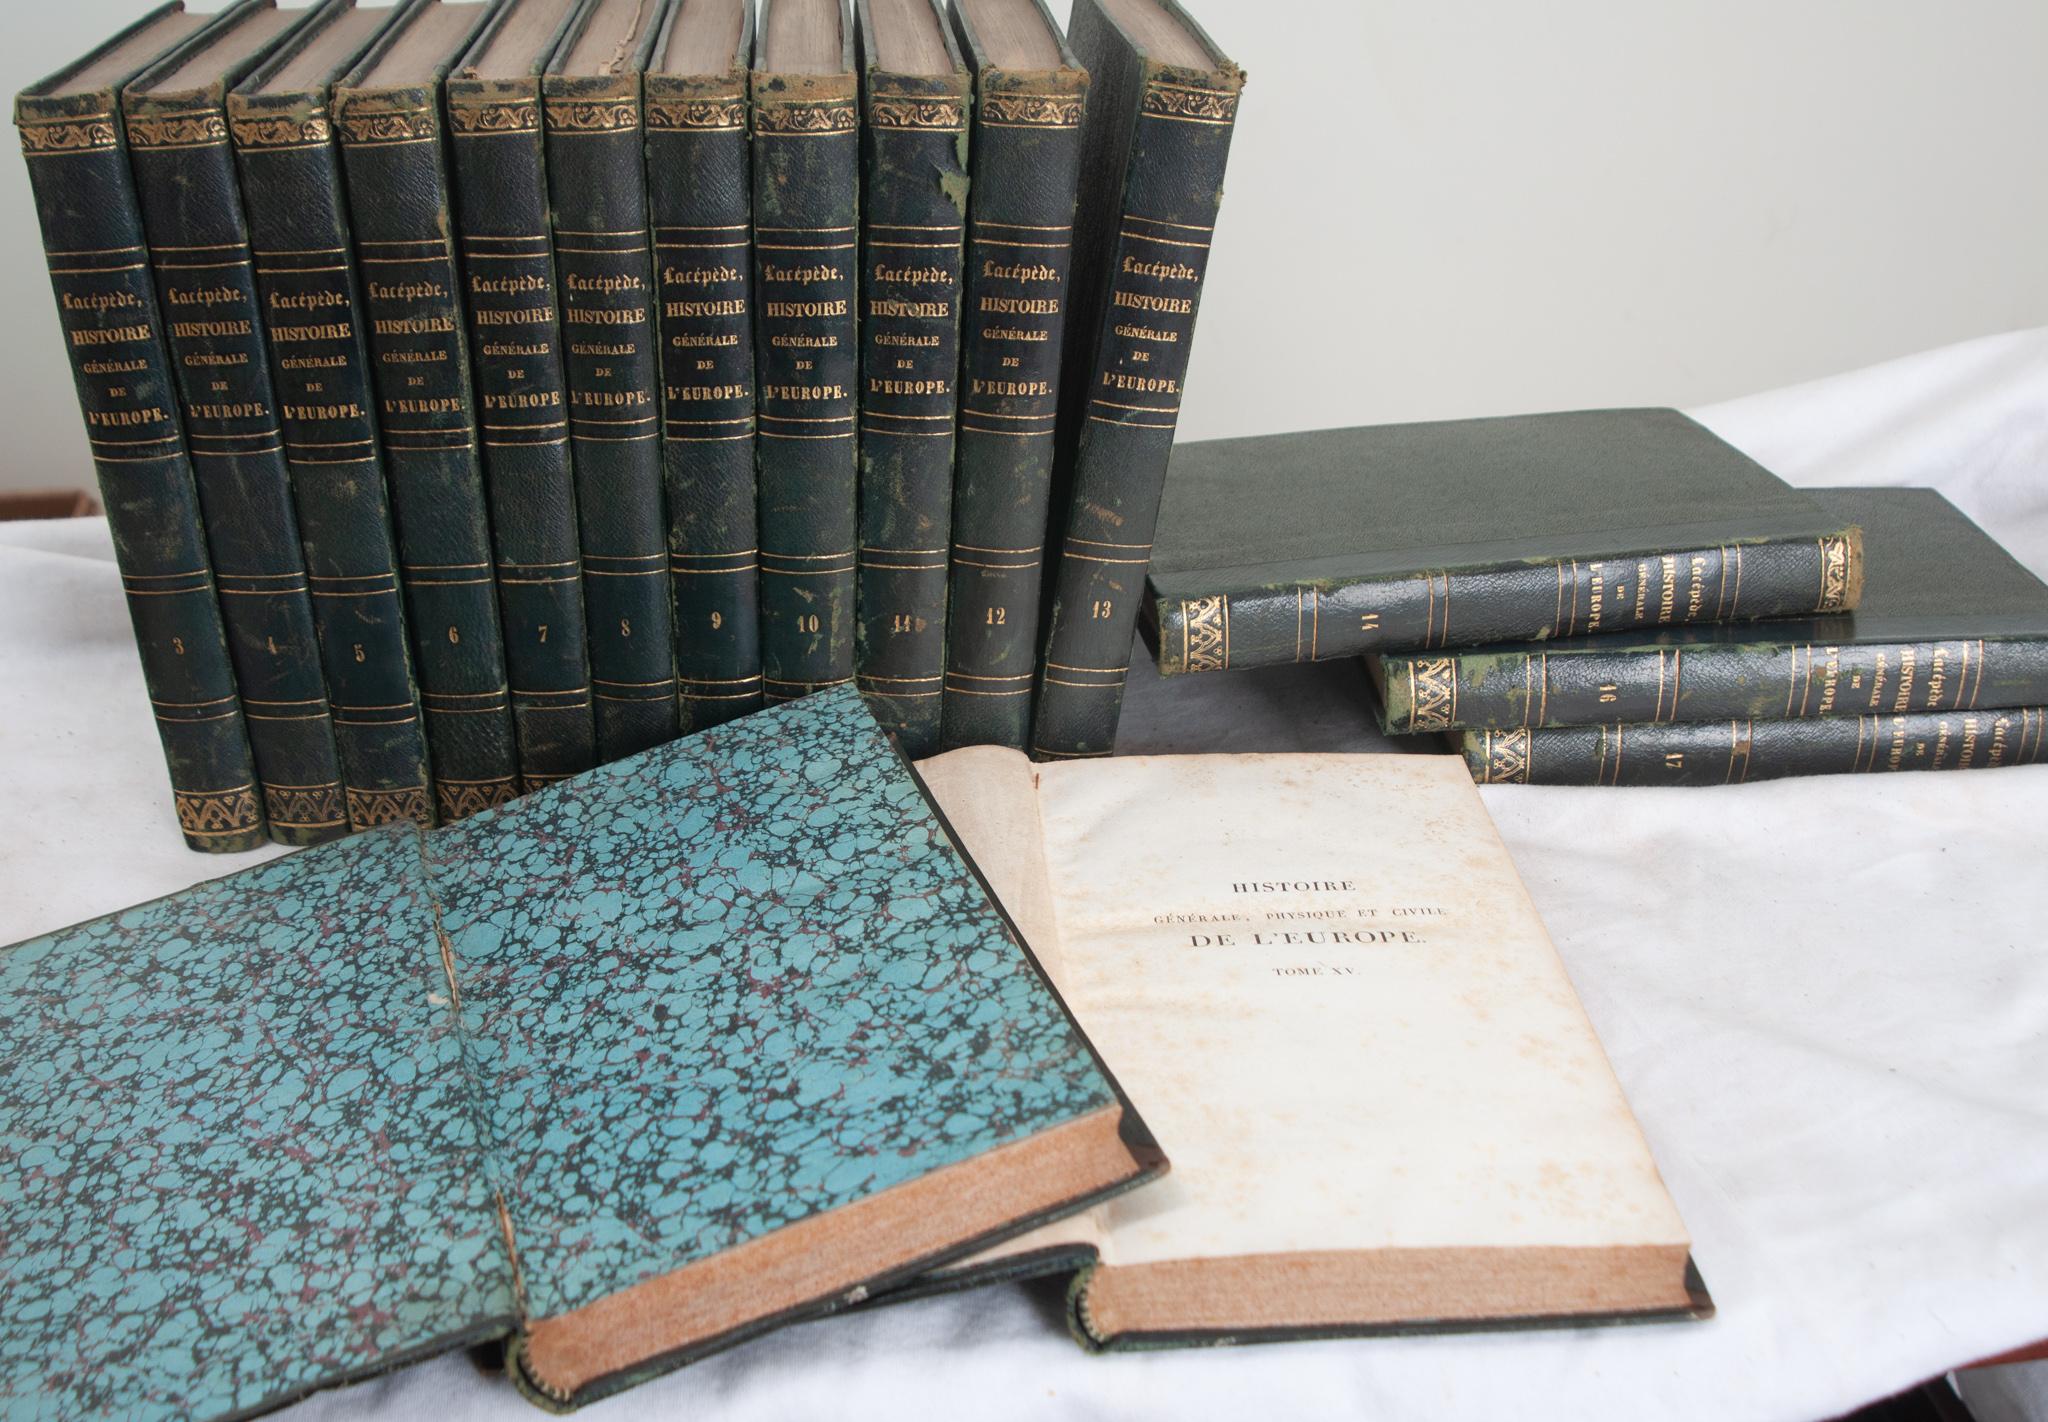 19th Century Set of 16 French History Books by M. LeCount de Lacépede